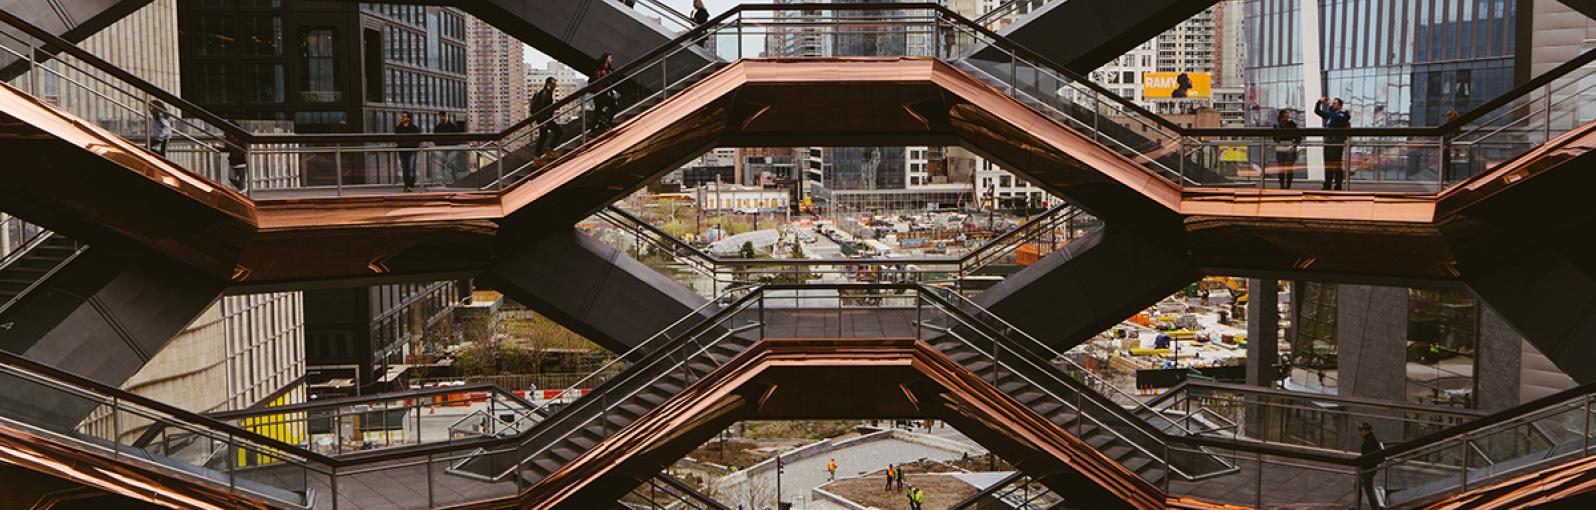 Vessel, connected staircase architecture in New York